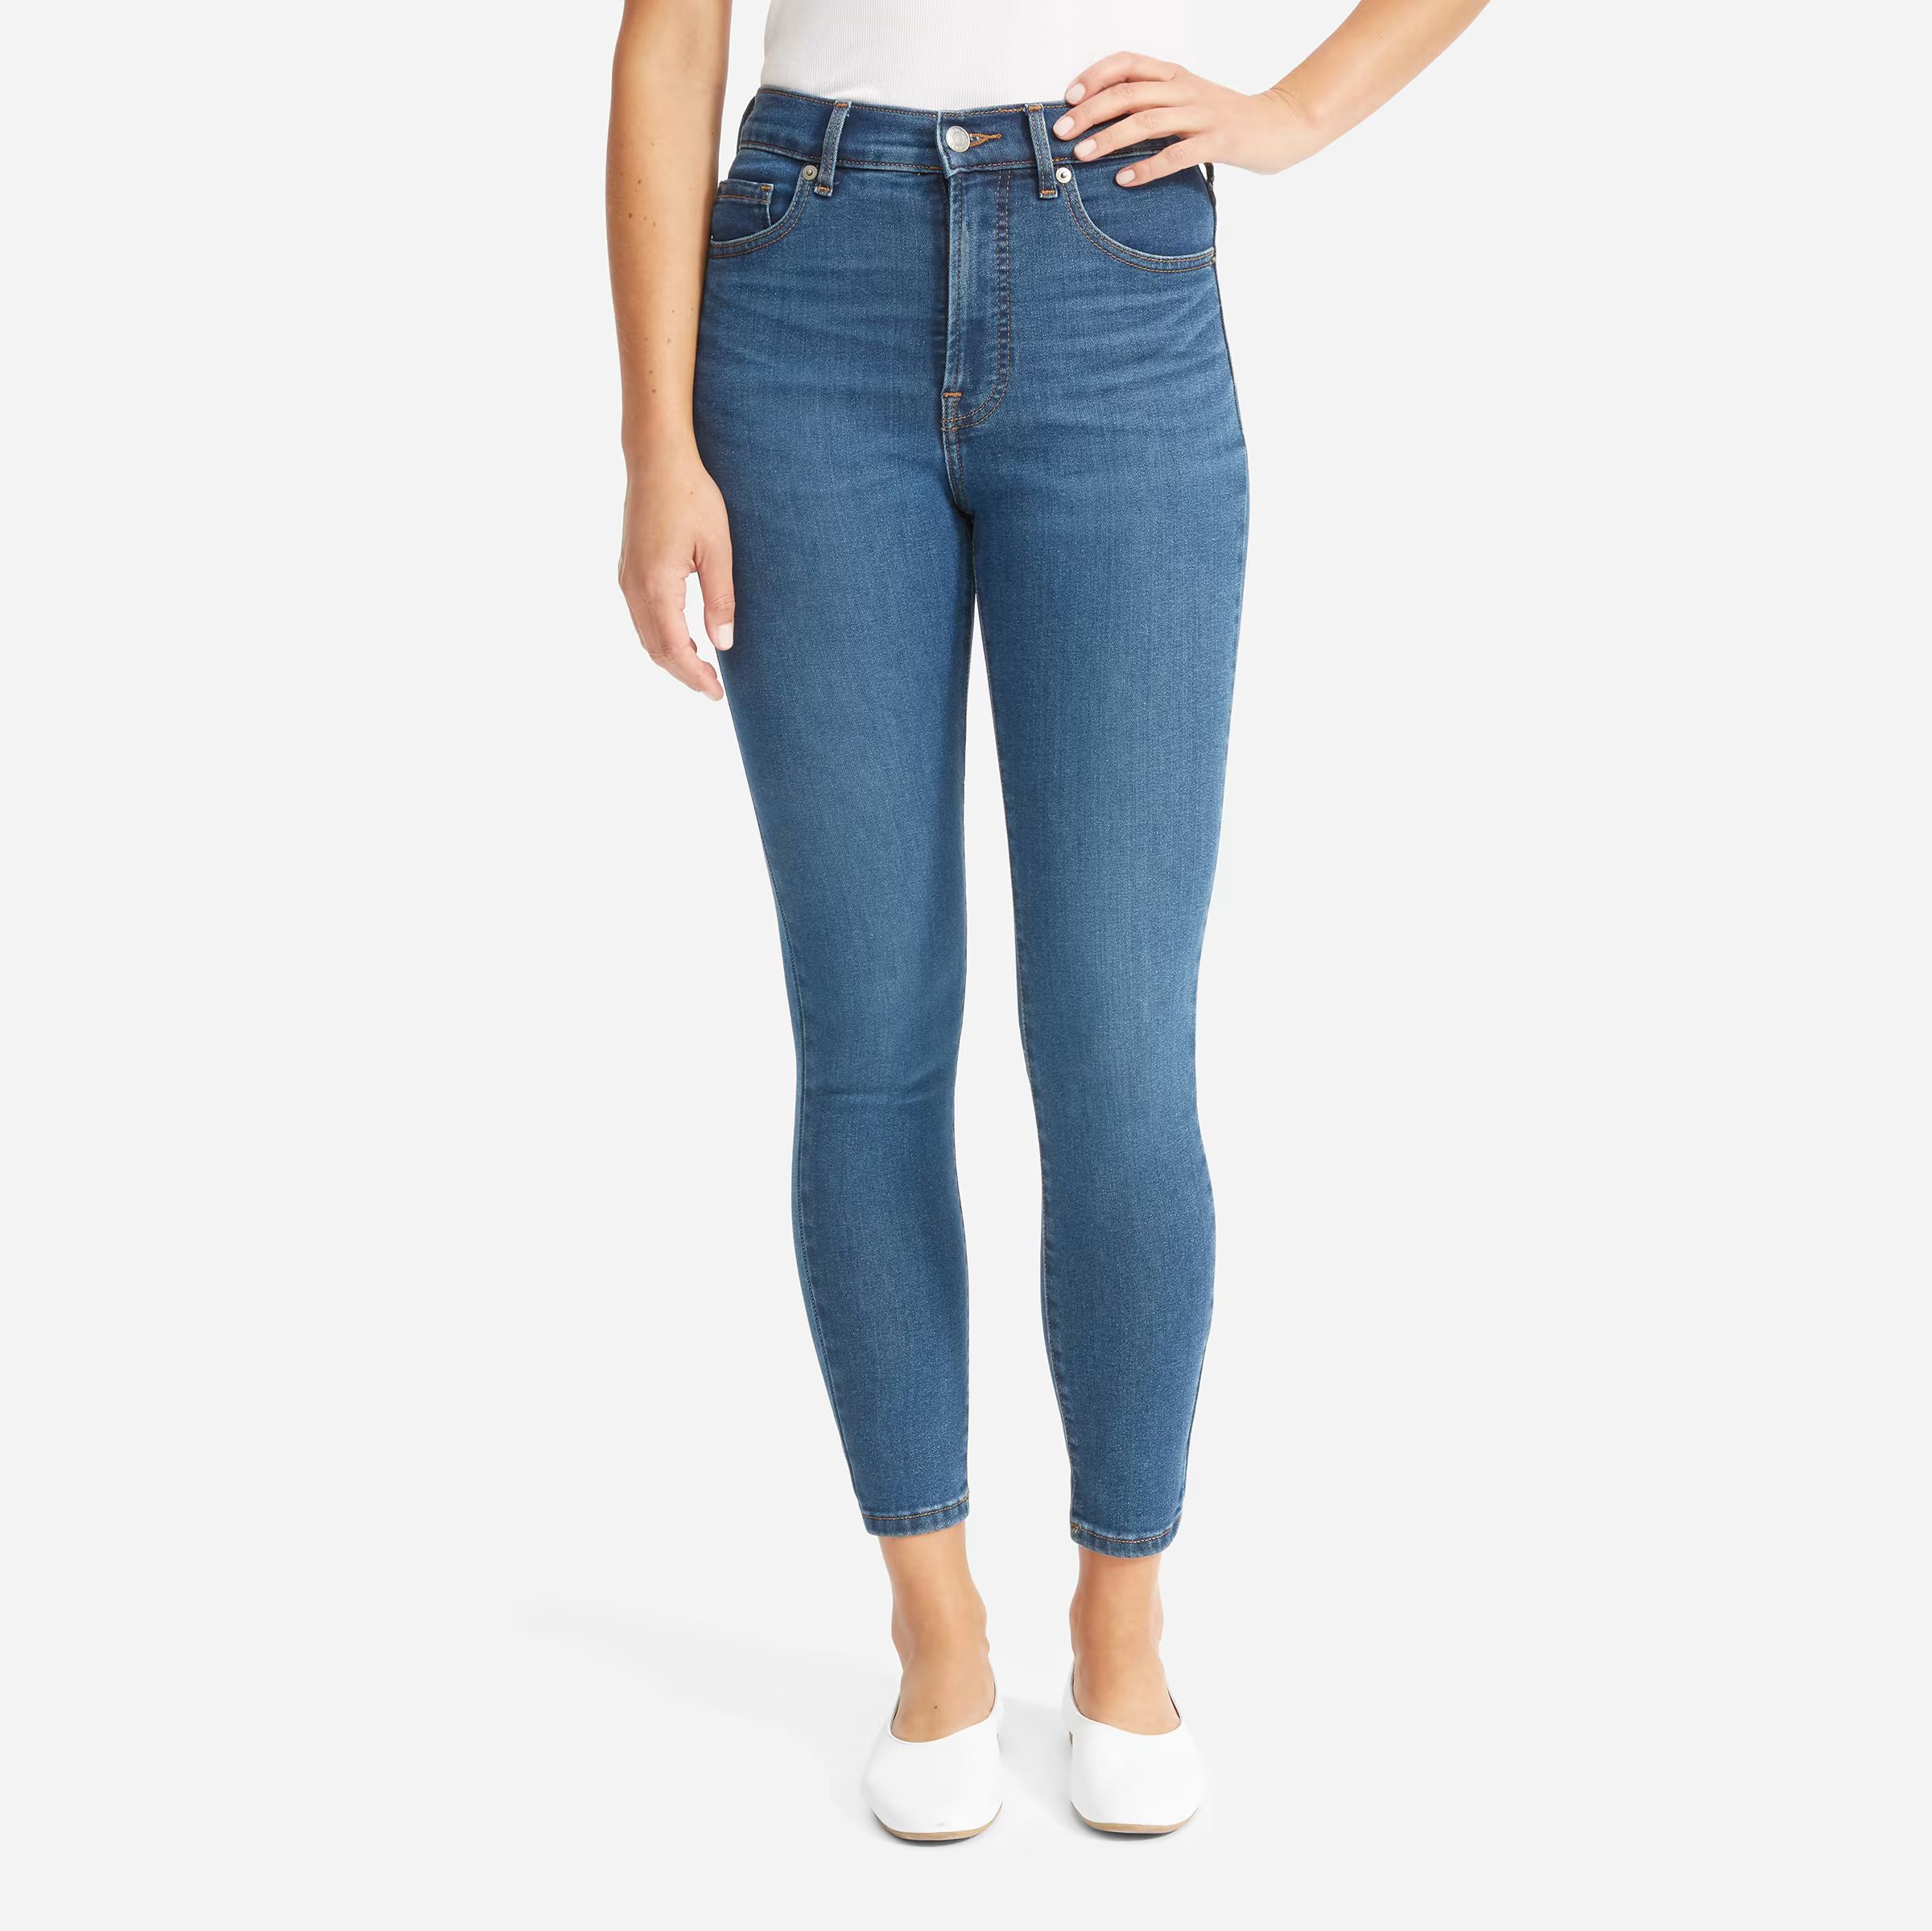 Authentic Stretch High-Rise Skinny — $68 $50 | Everlane